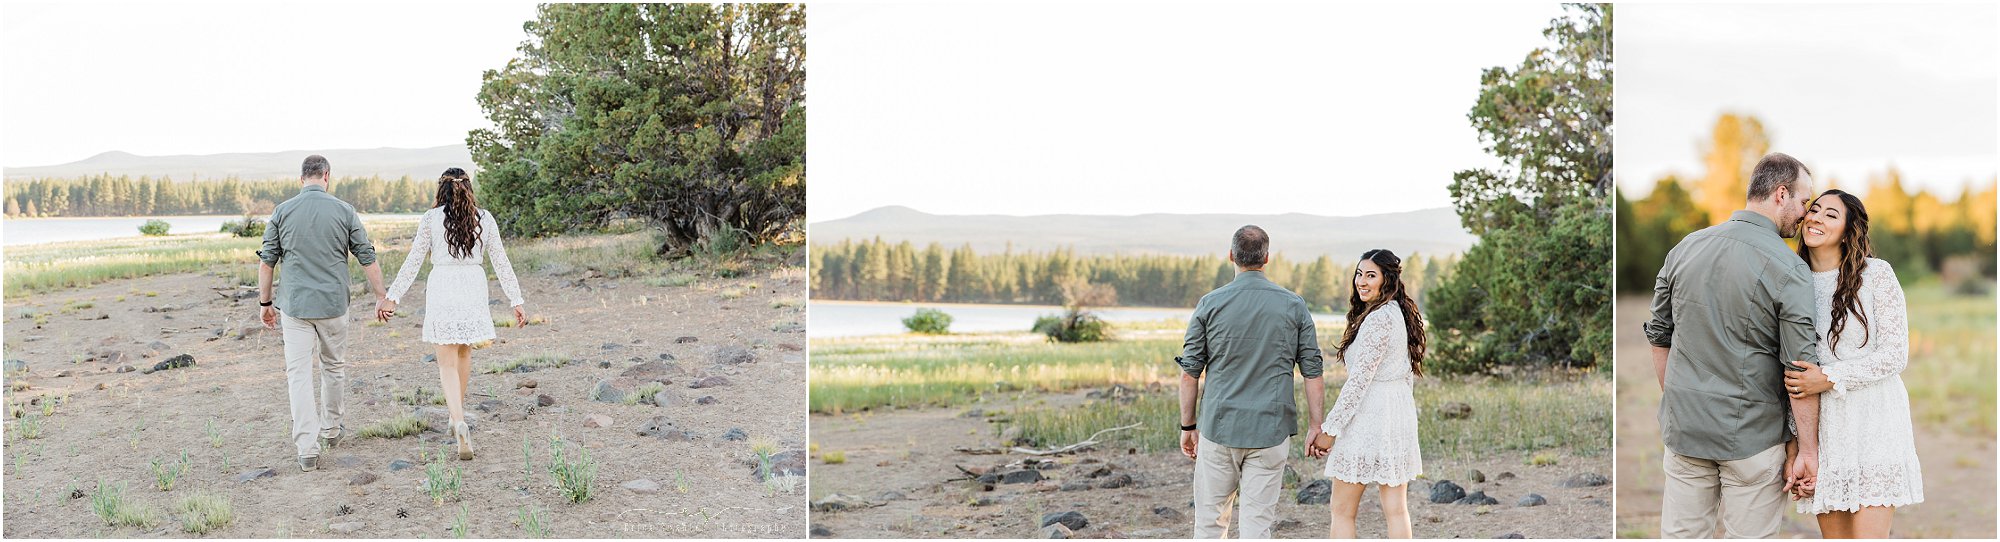 A gorgeous engagement photo session at Tumalo Reservoir near Bend, OR. | Erica Swantek Photography